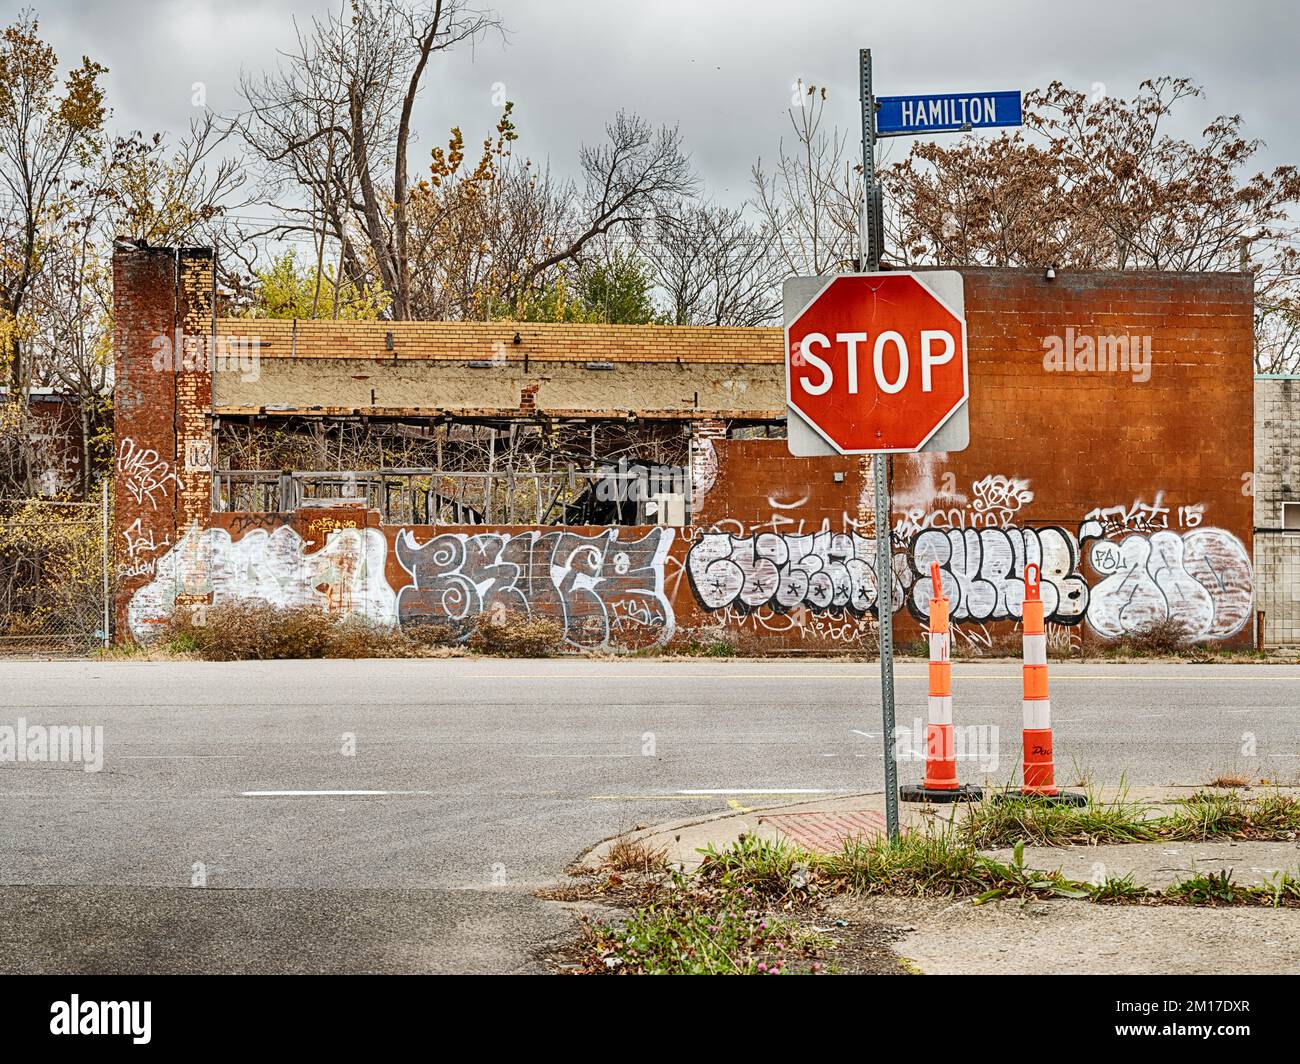 DETROIT, MICHIGAN - NOVEMBER 13, 2021: A stop sign on Hamilton Avenue stands in front of an abandoned business covered with graffiti in Detroit, Michi Stock Photo